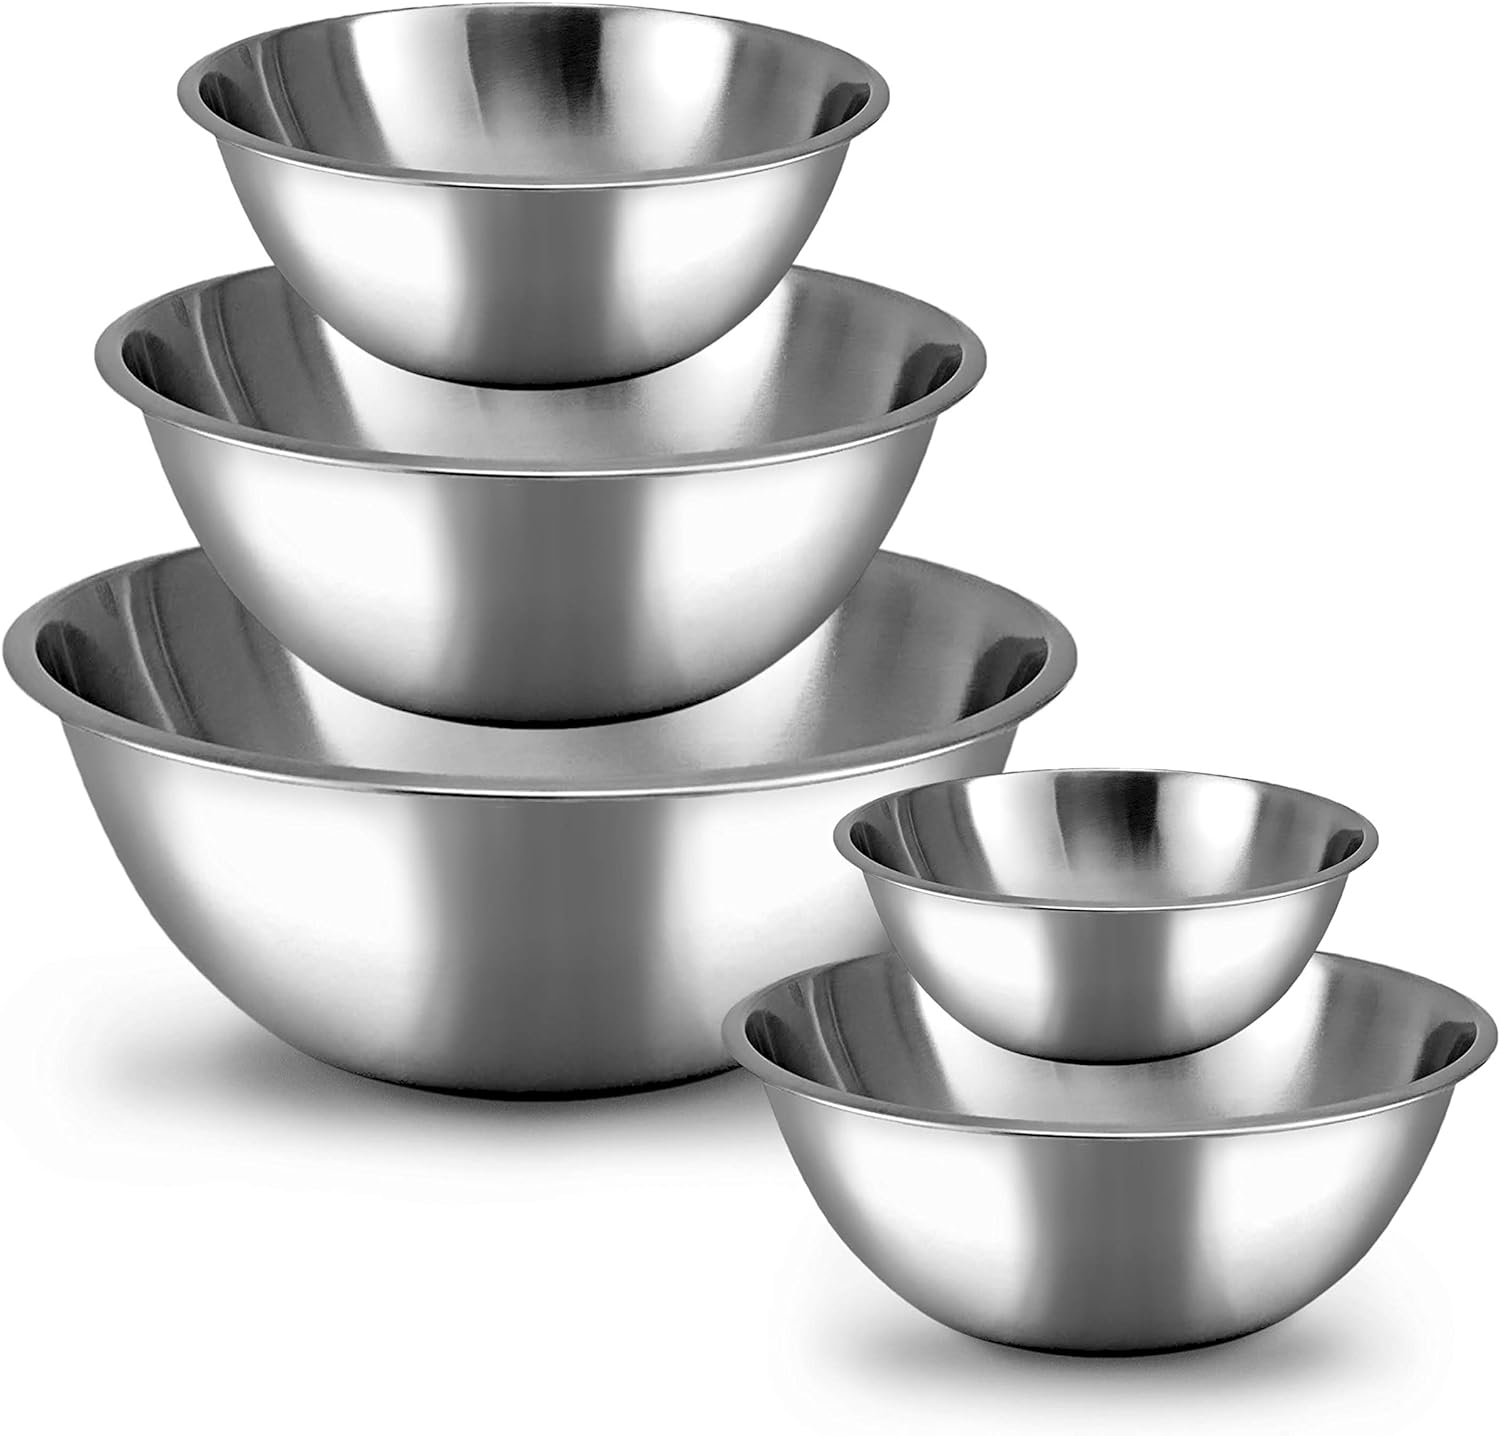 Meal Prep Stainless Steel Mixing Bowls